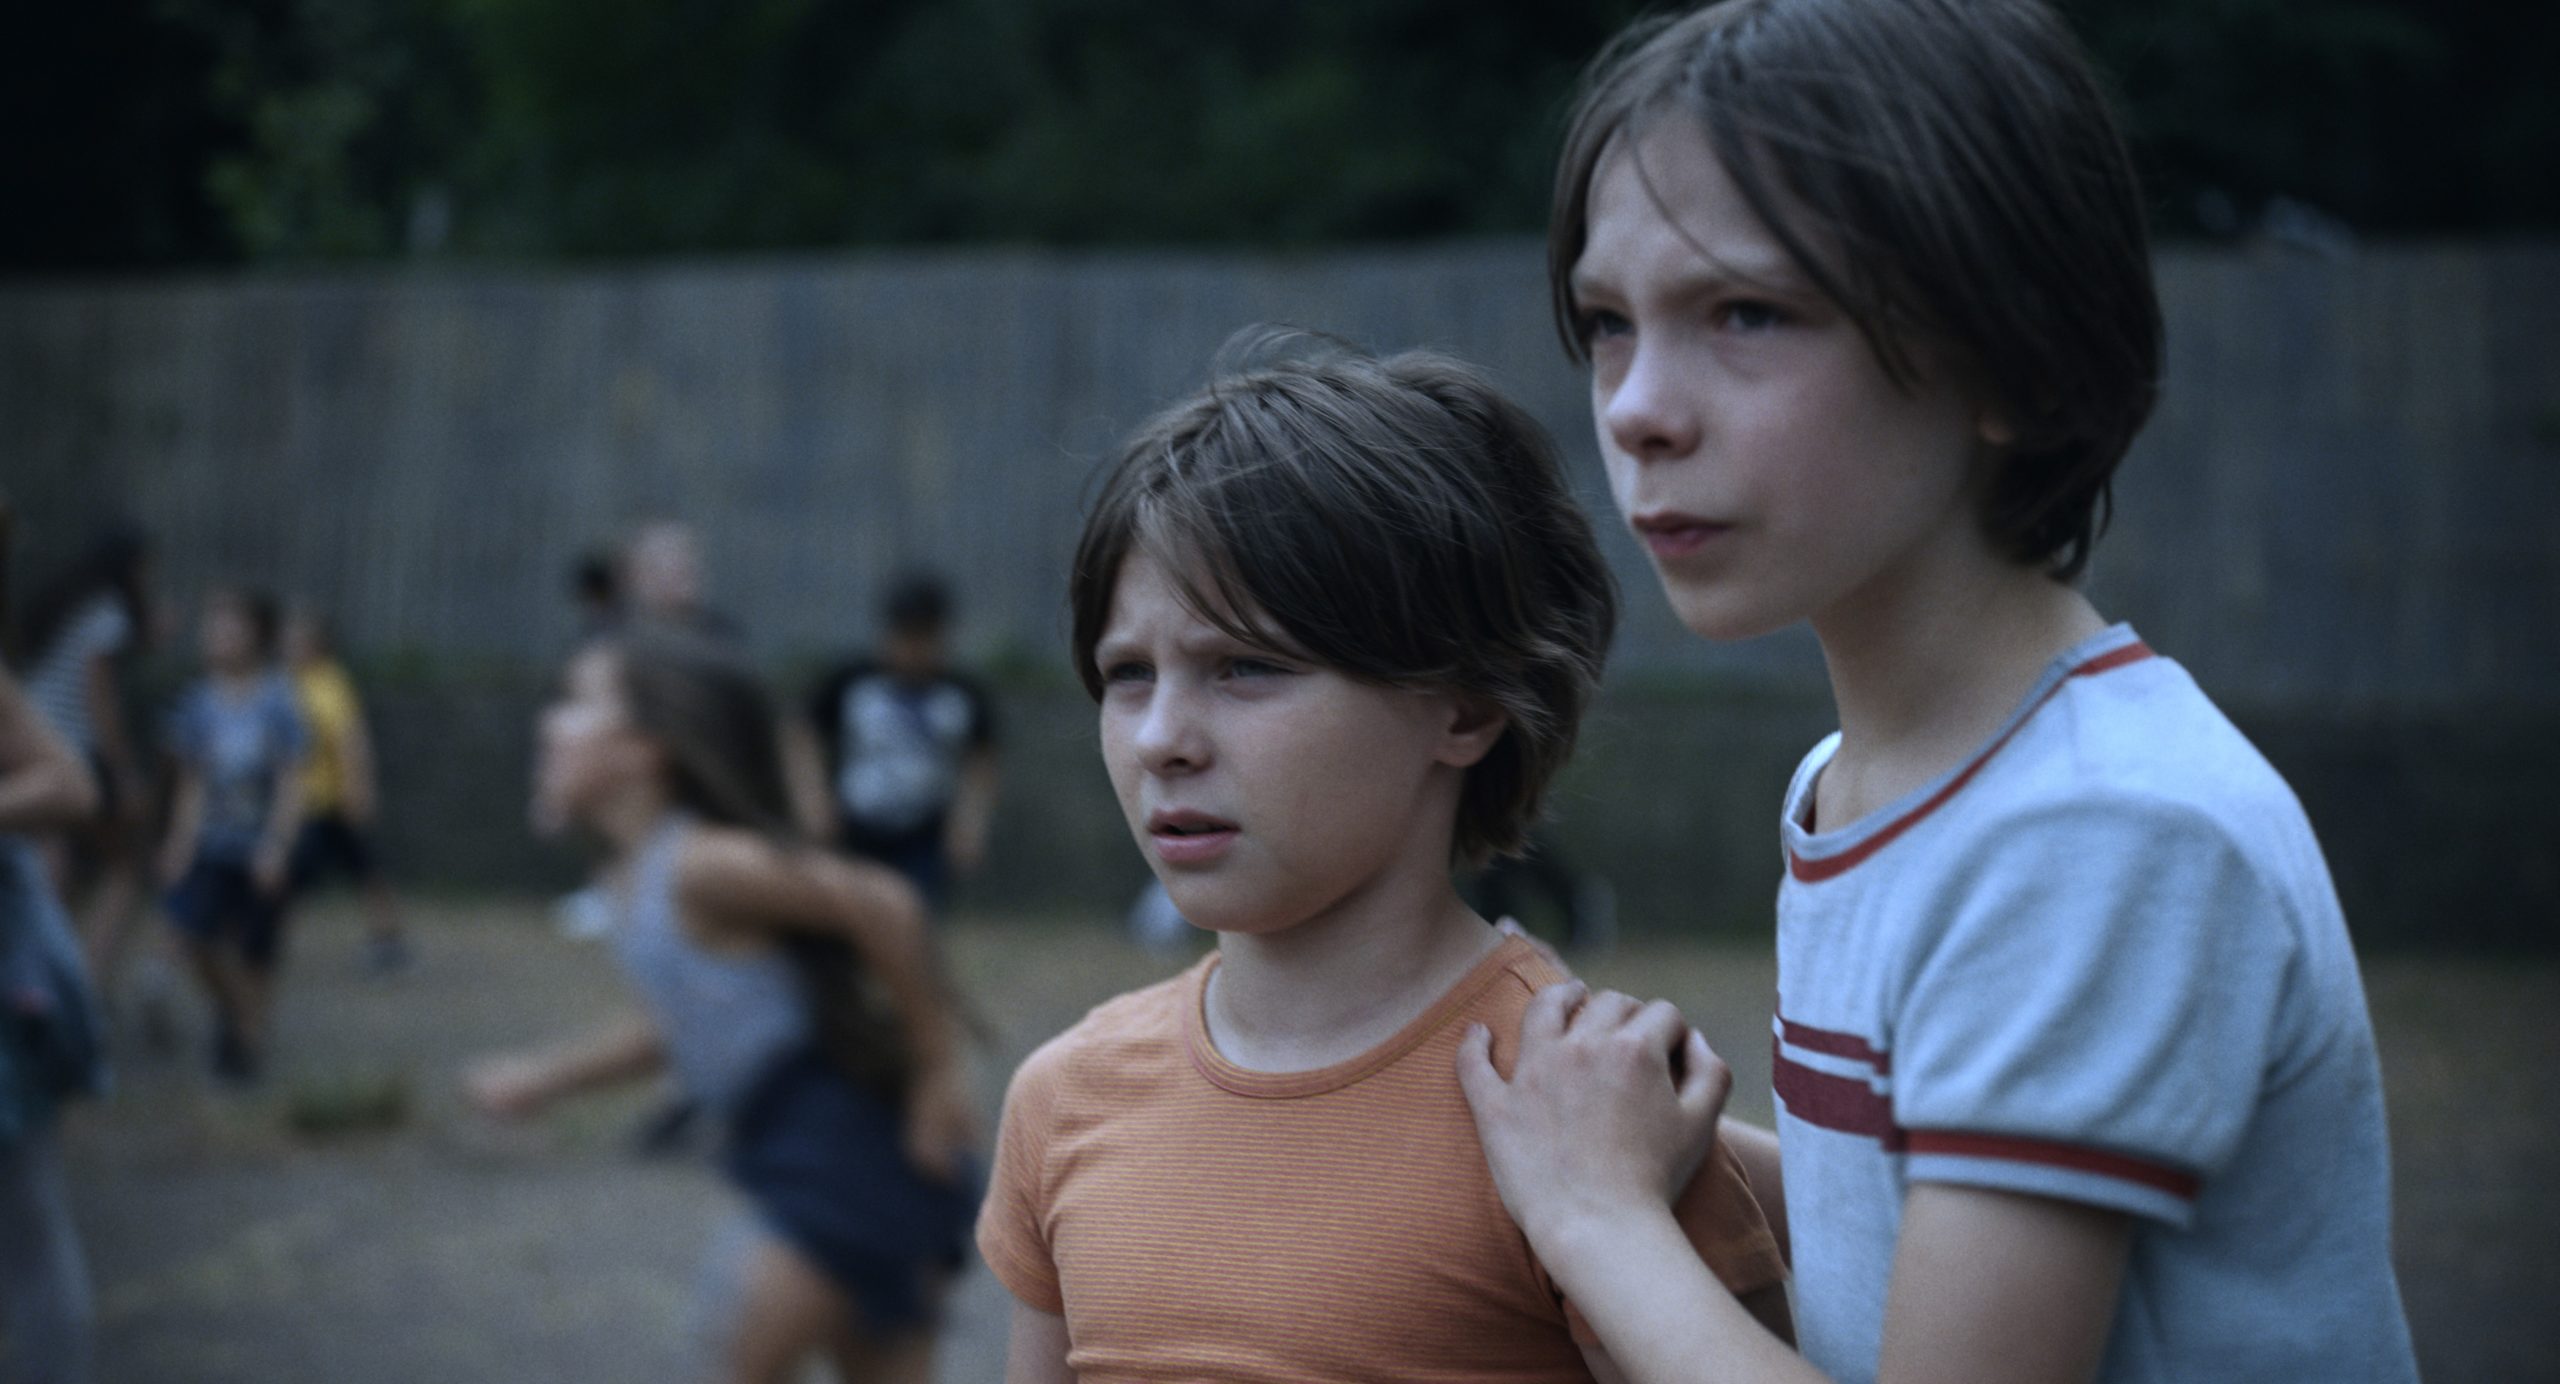 Playground | Laura Wandel Talks About The Oscar Entry Film [Exclusive Interview]